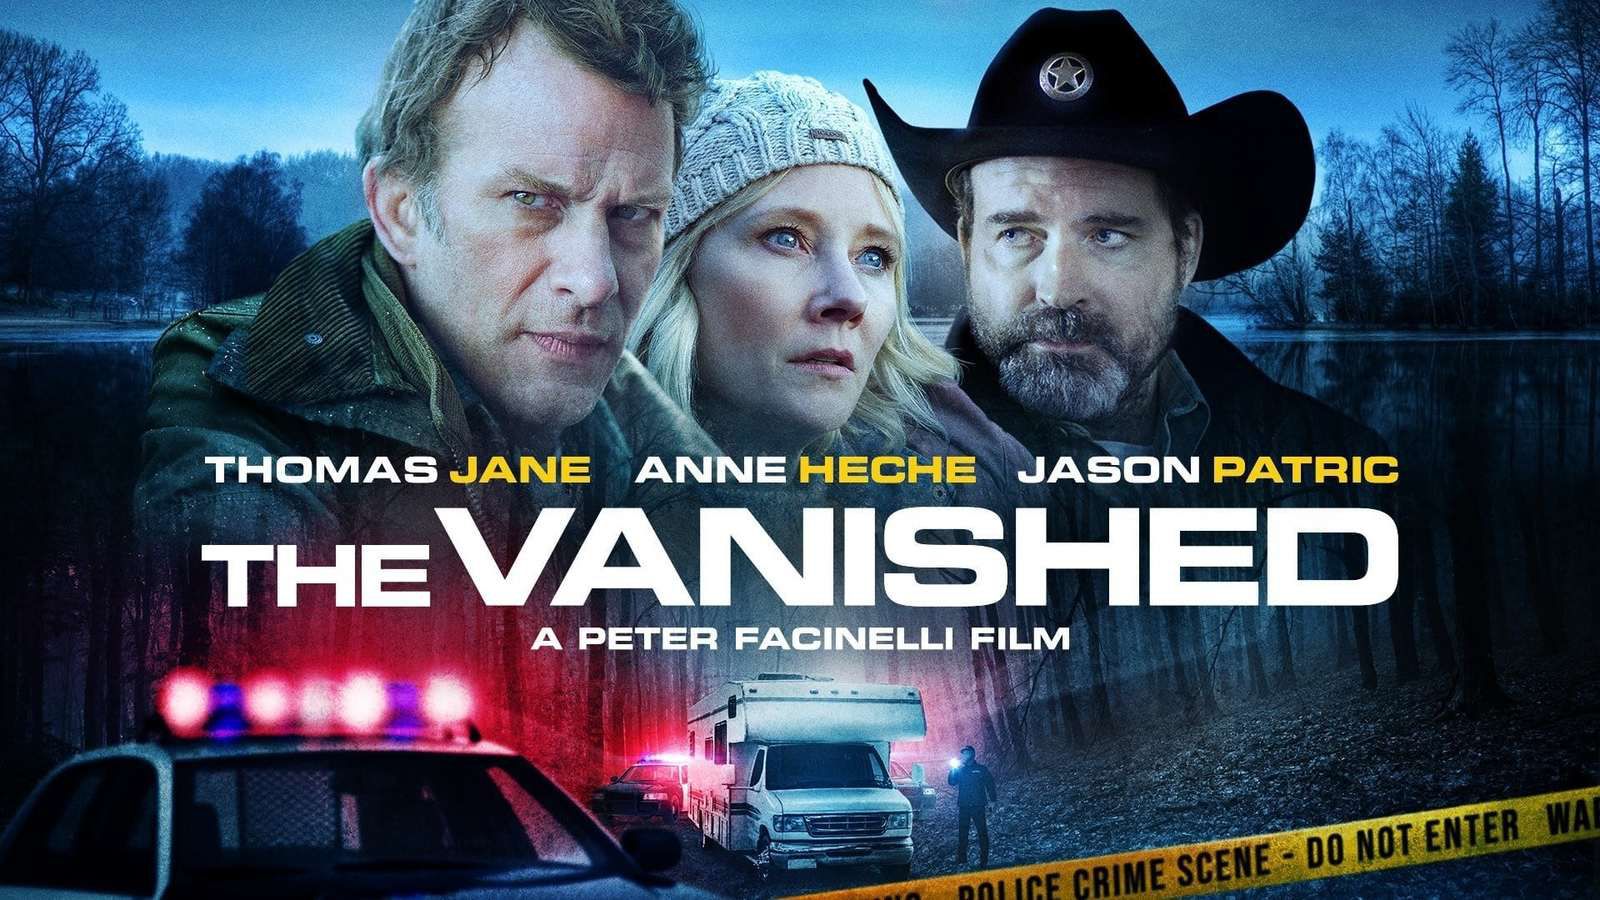 The Vanished Review: It Is Routine Thriller Lifted By Shock Ending 13